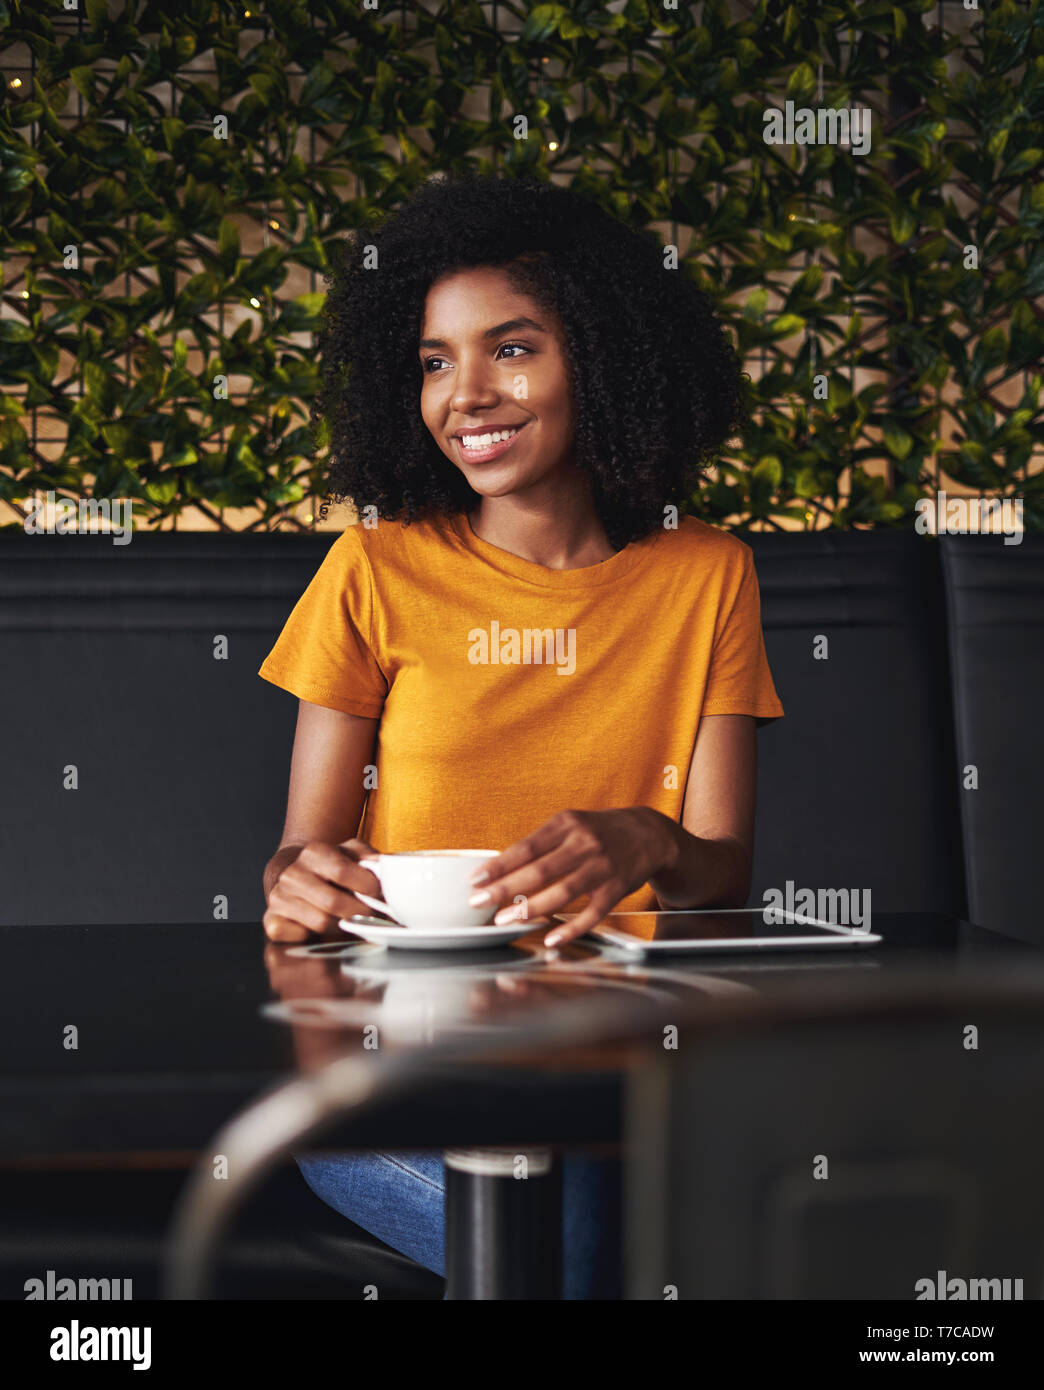 Smiling young woman sitting in cafe Banque D'Images